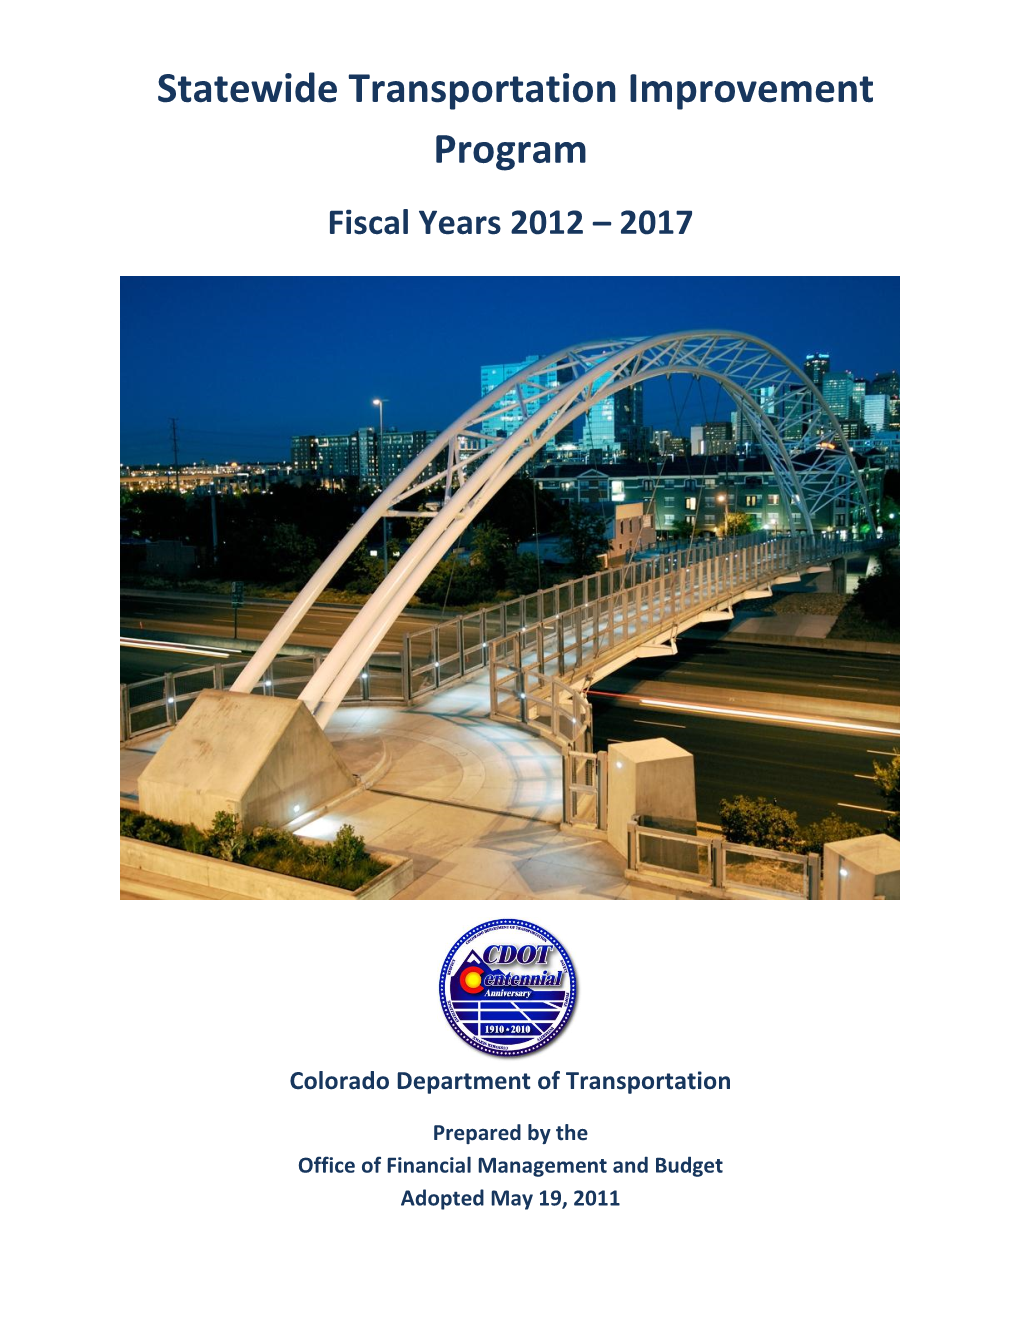 Statewide Transportation Improvement Program Fiscal Years 2012 – 2017